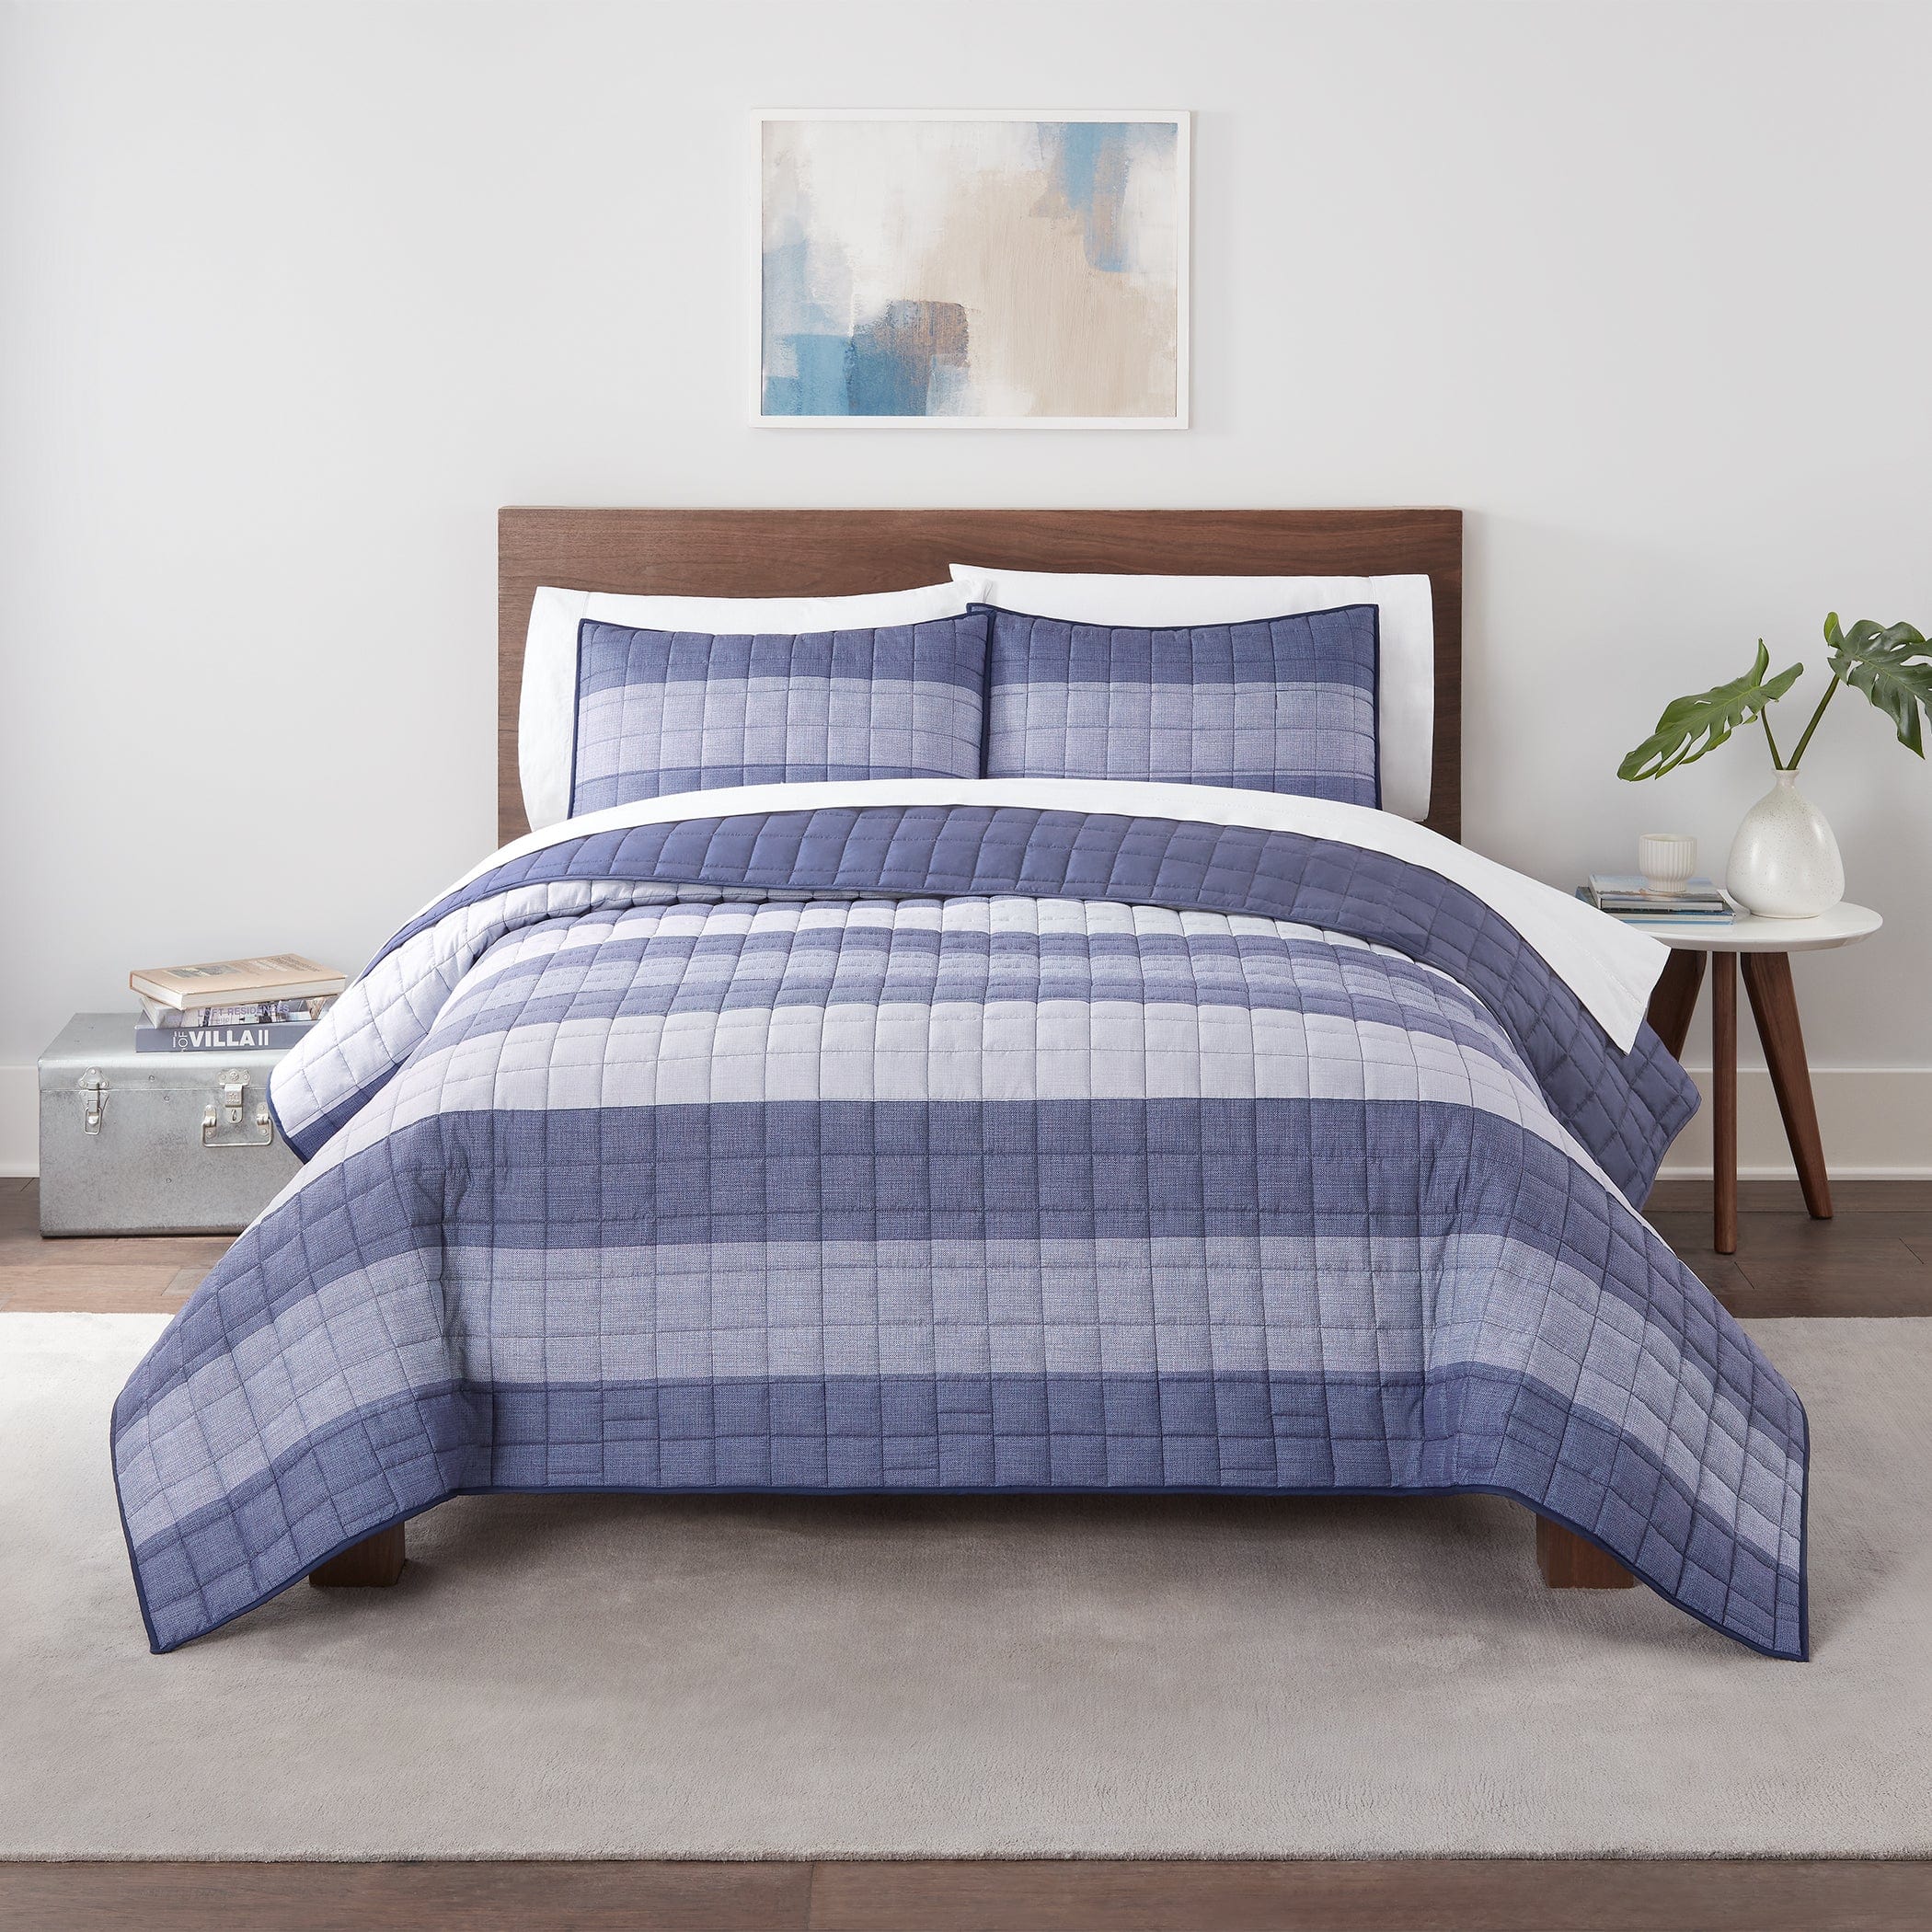 Simply Clean by Serta Textured Stripe Comforter Quilt in Blue Full/Queen Size